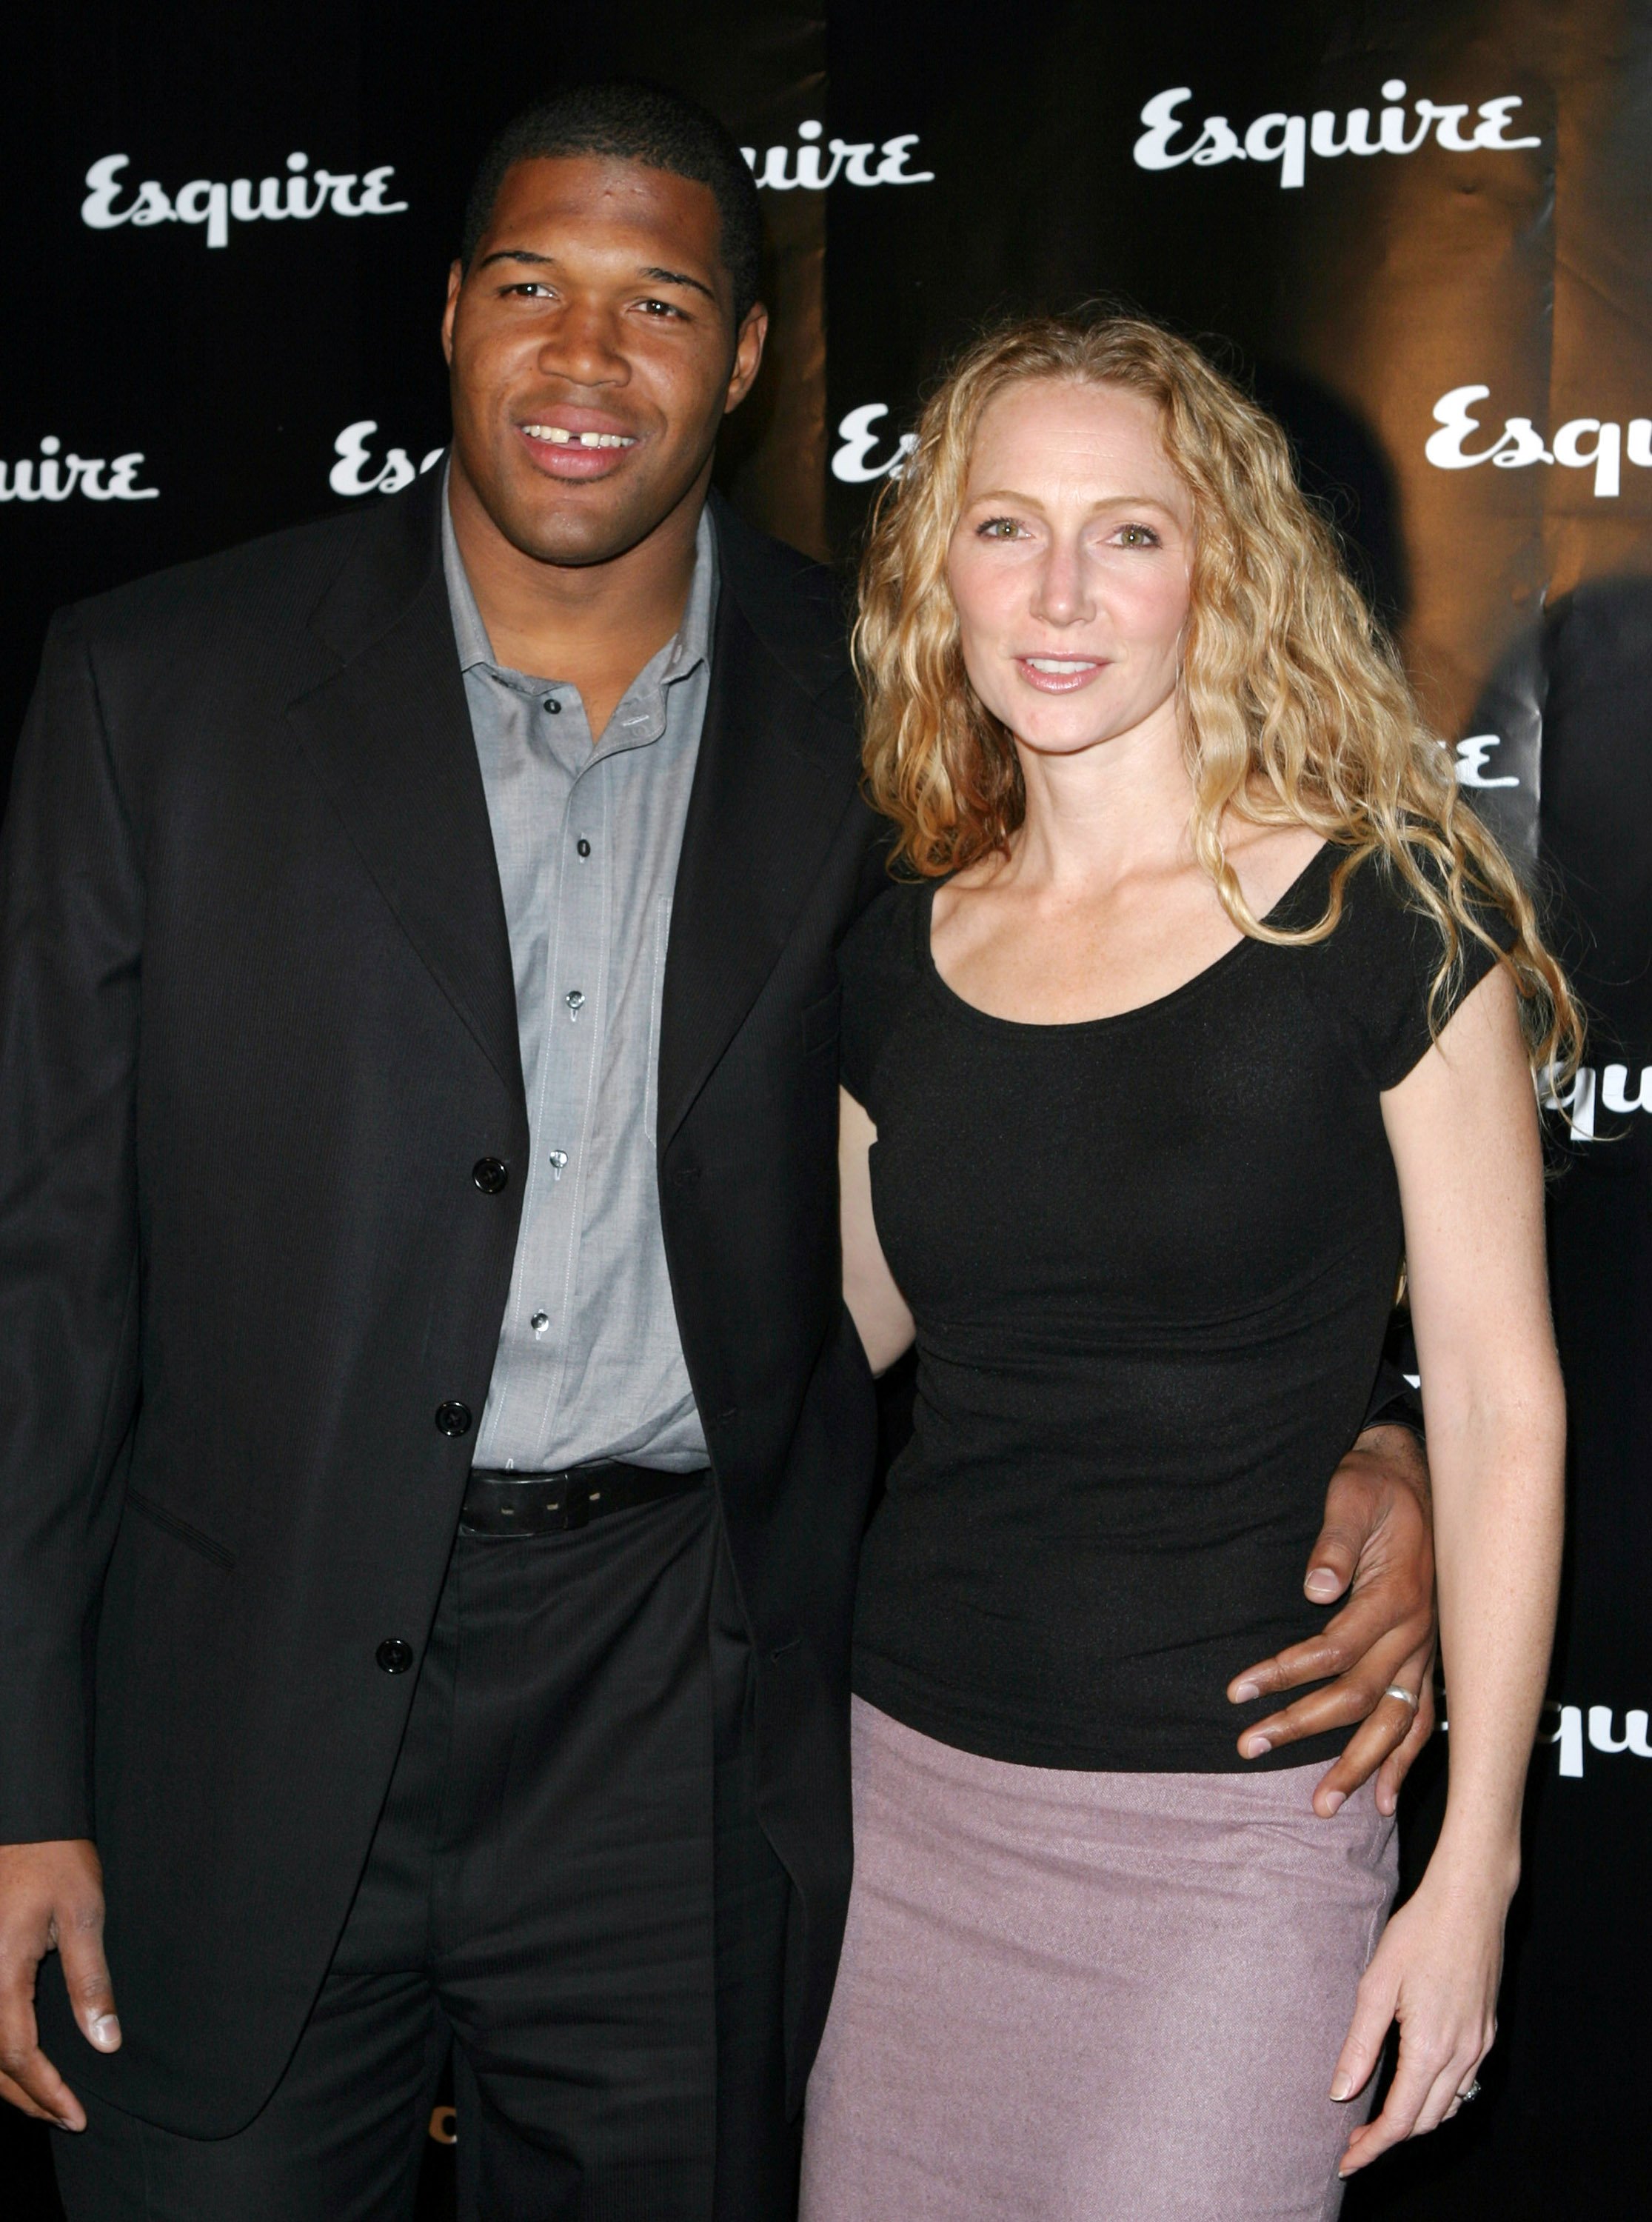 Michael Strahan and wife Jean attend the Esquire Apartment Launch in 2003 | Source: Getty Images